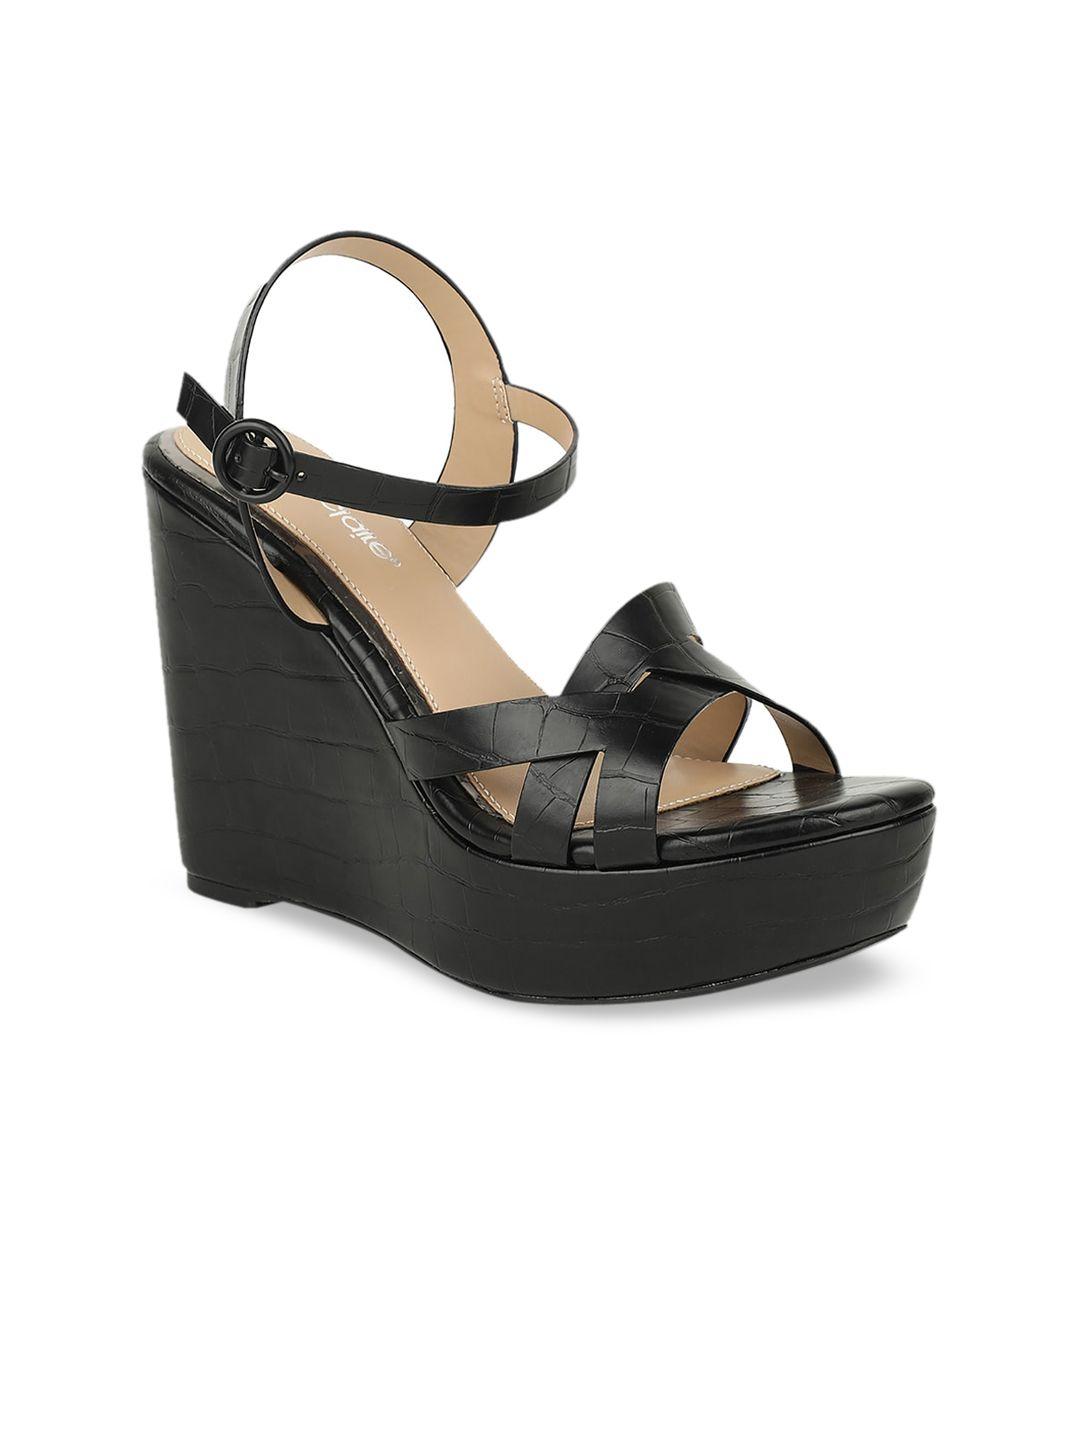 marie claire women black solid wedges